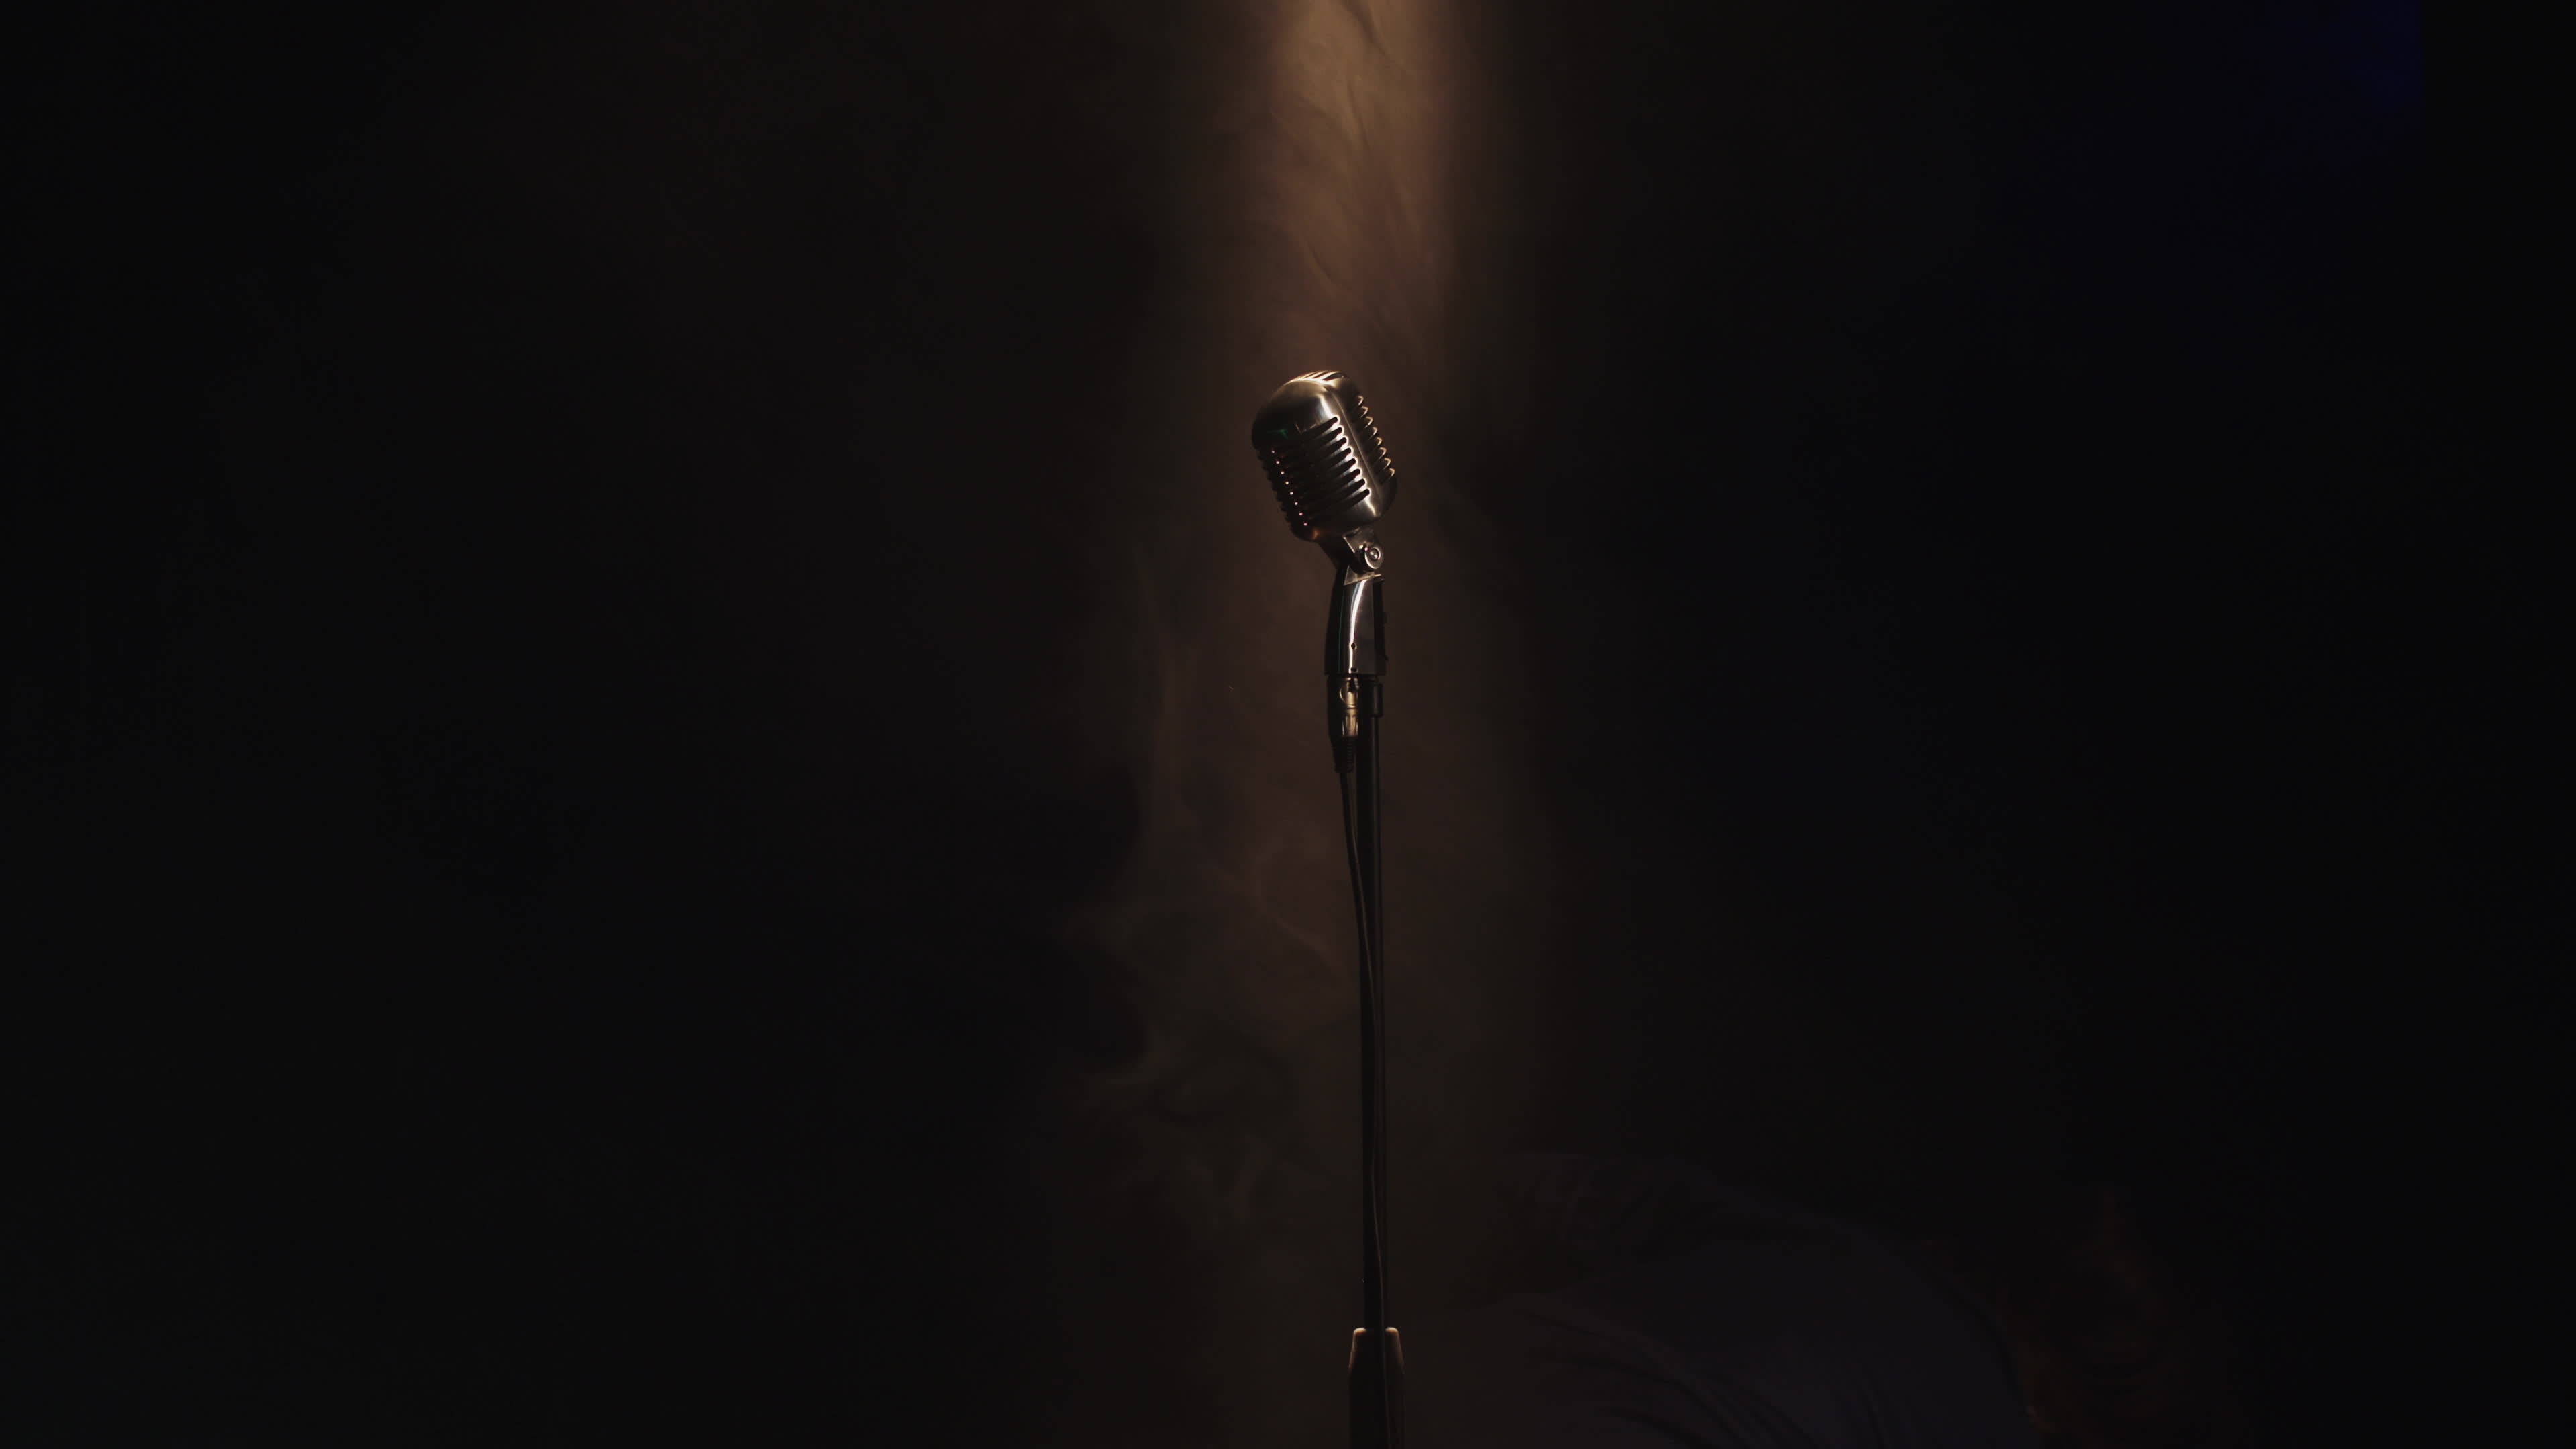 Running away from stage, Vintage microphone prop, Smoky atmosphere, Mysterious ambiance, 3840x2160 4K Desktop